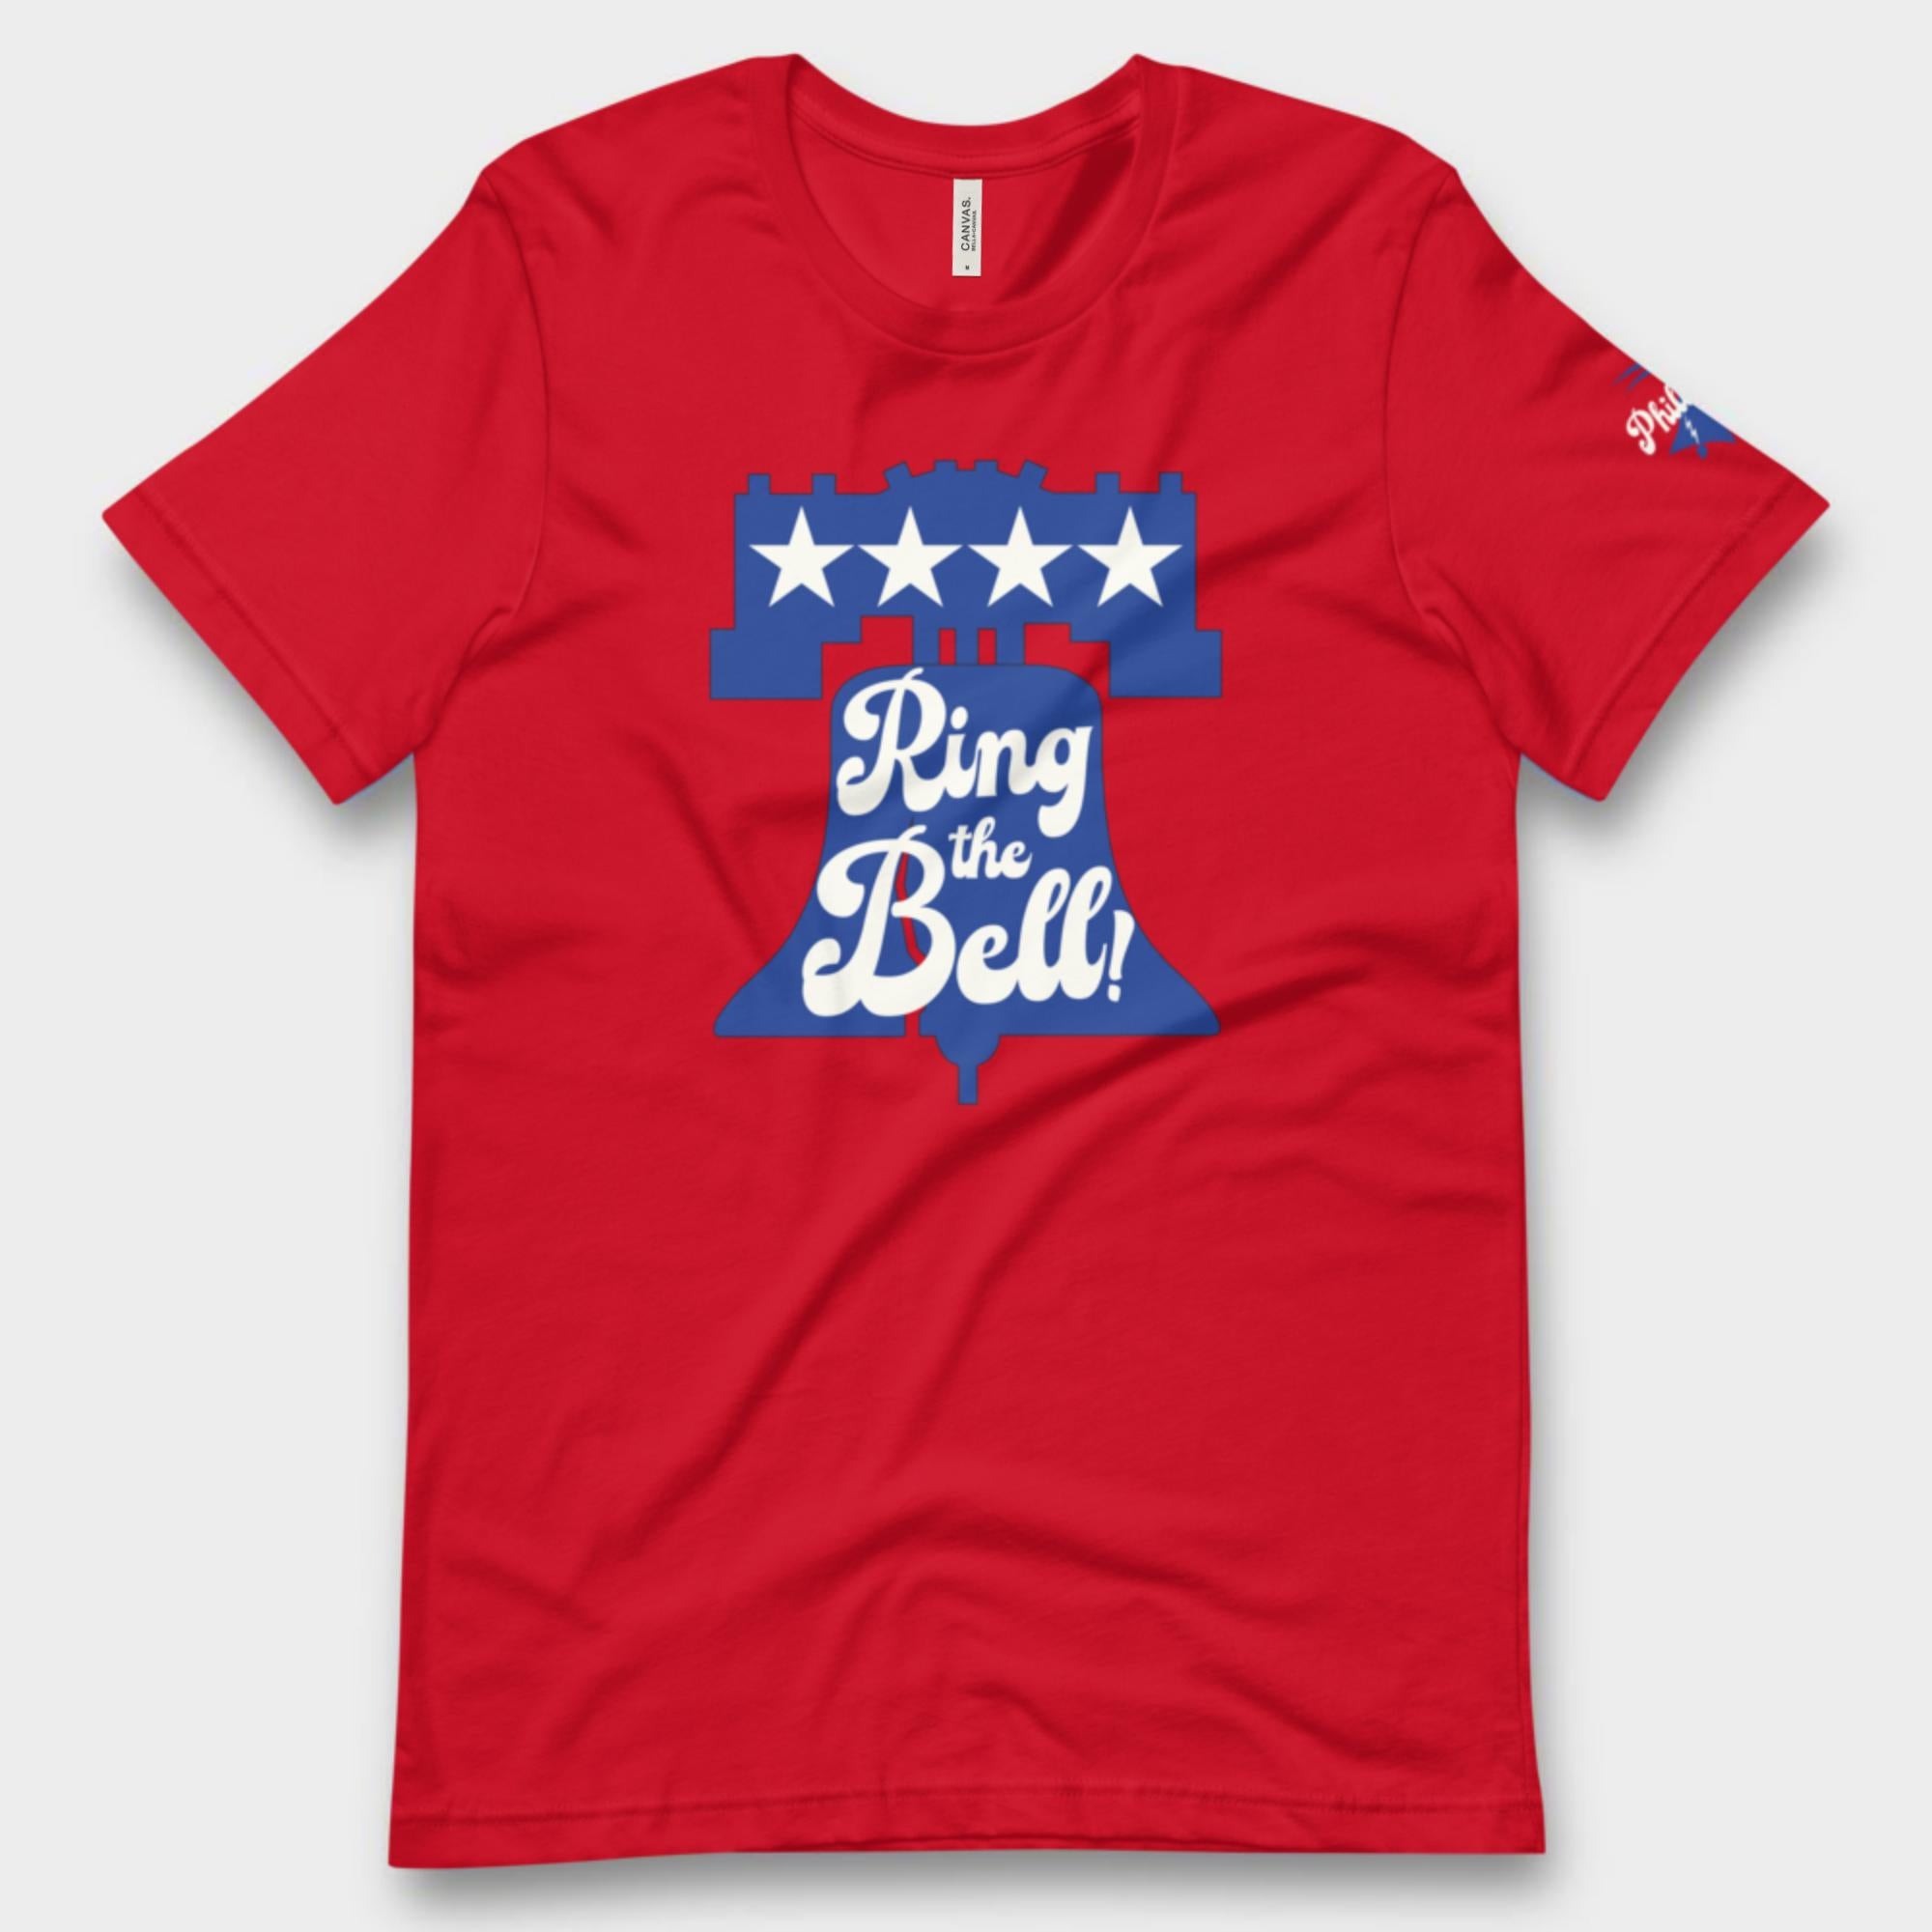 "Ring the Bell" Tee